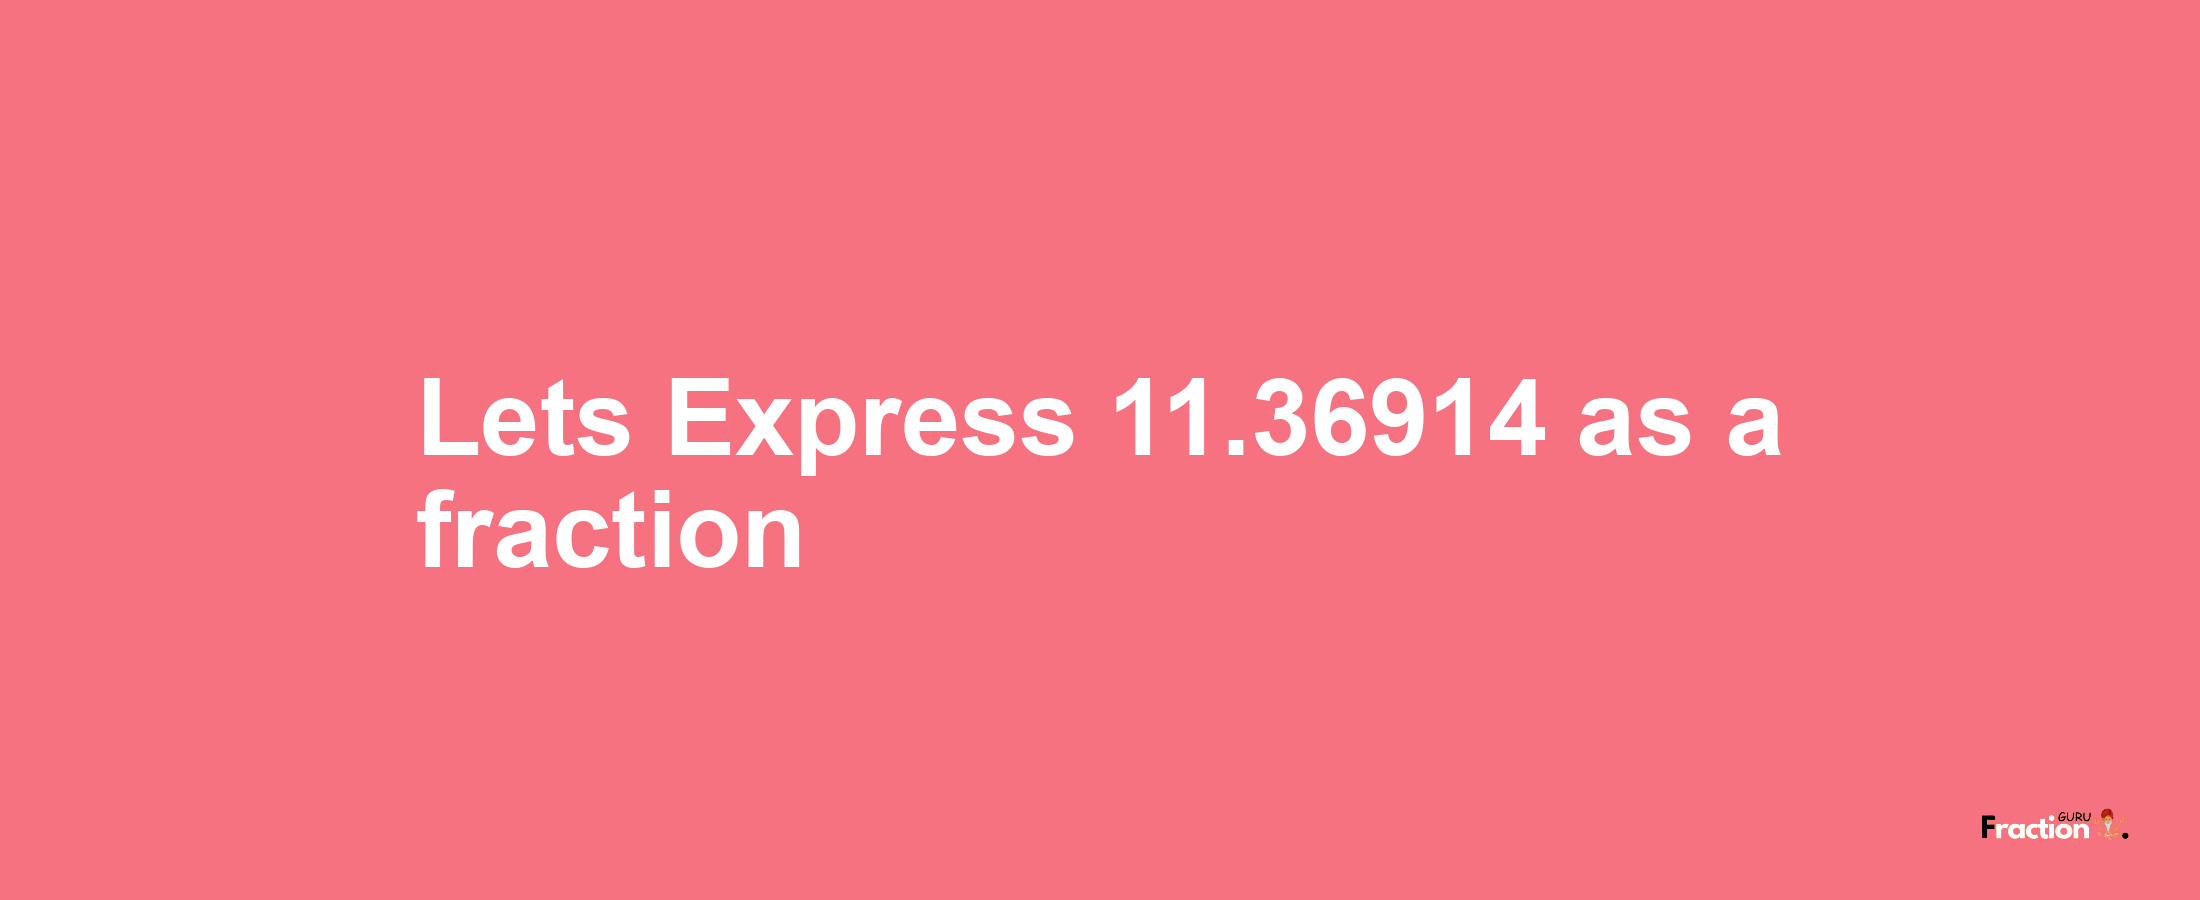 Lets Express 11.36914 as afraction